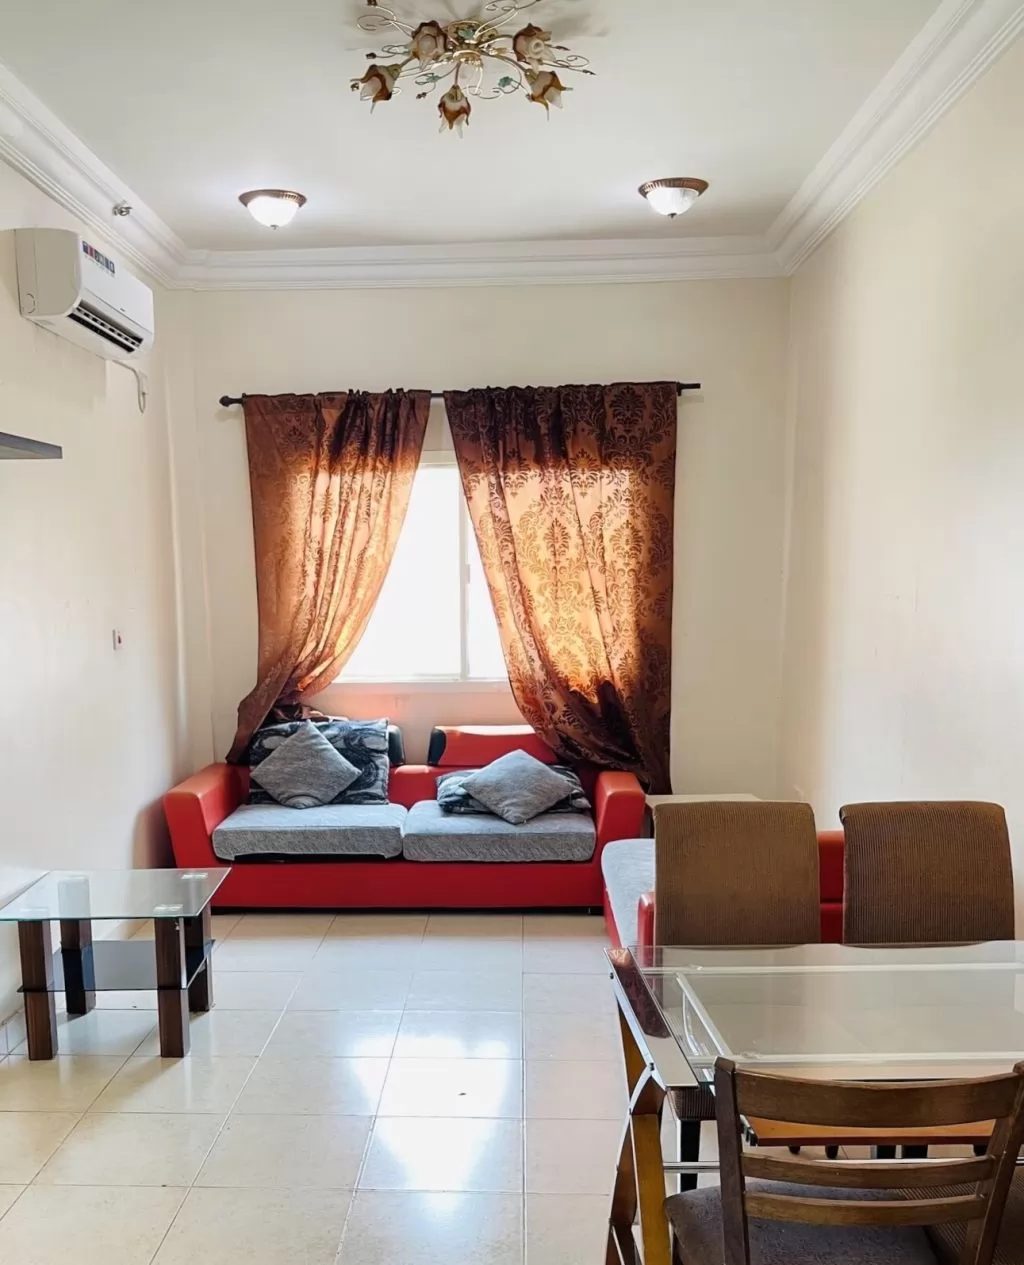 Residential Ready Property 1 Bedroom F/F Apartment  for rent in Al Sadd , Doha #22837 - 1  image 